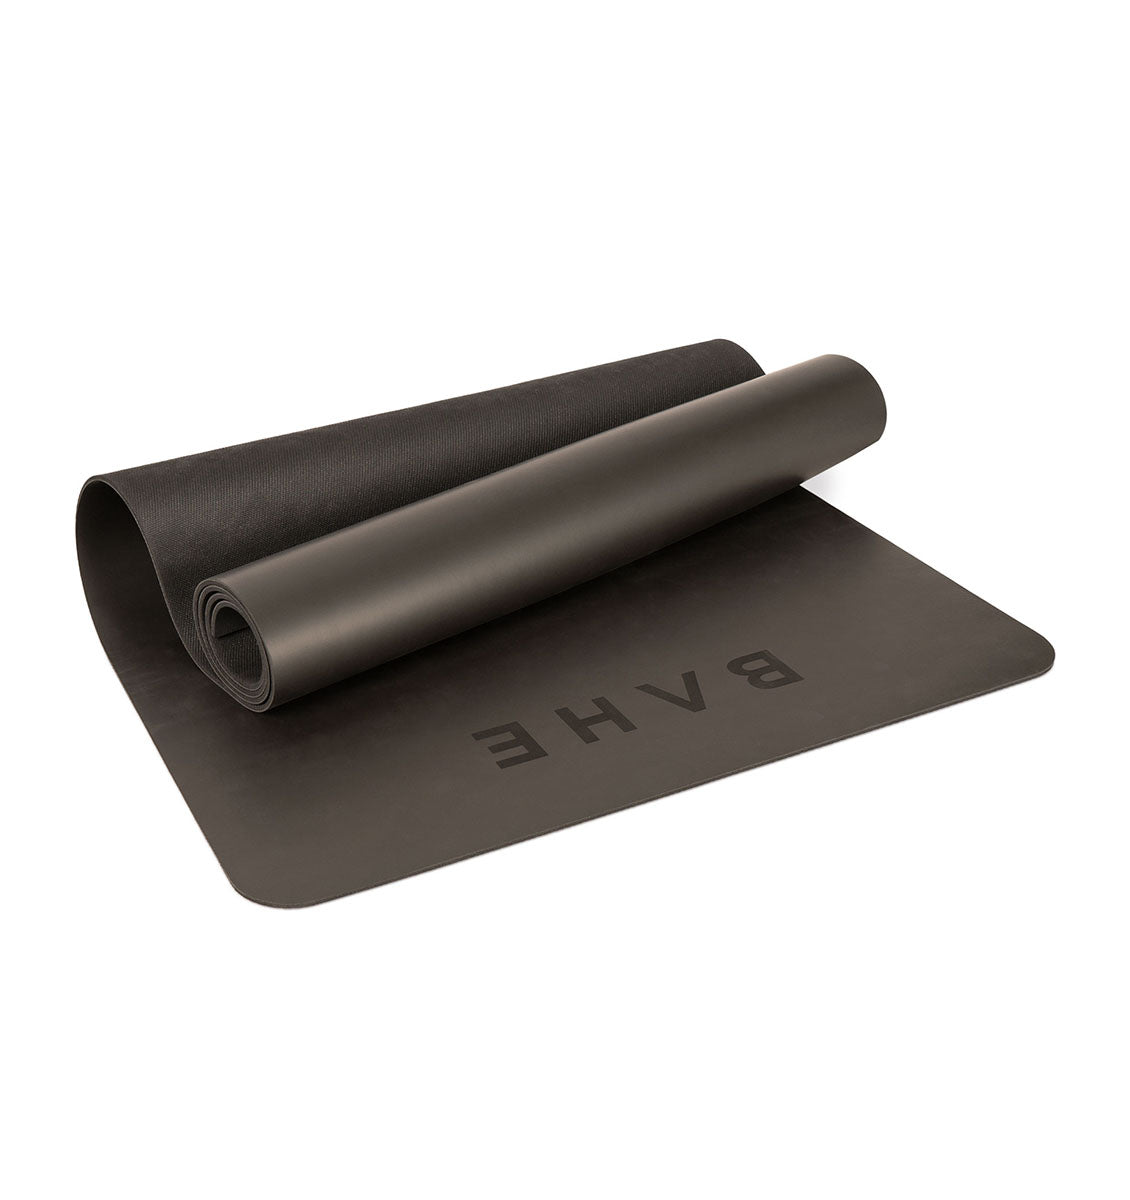 BAHE Power Hold Yoga Mat - 4mm - Anthracite - 2